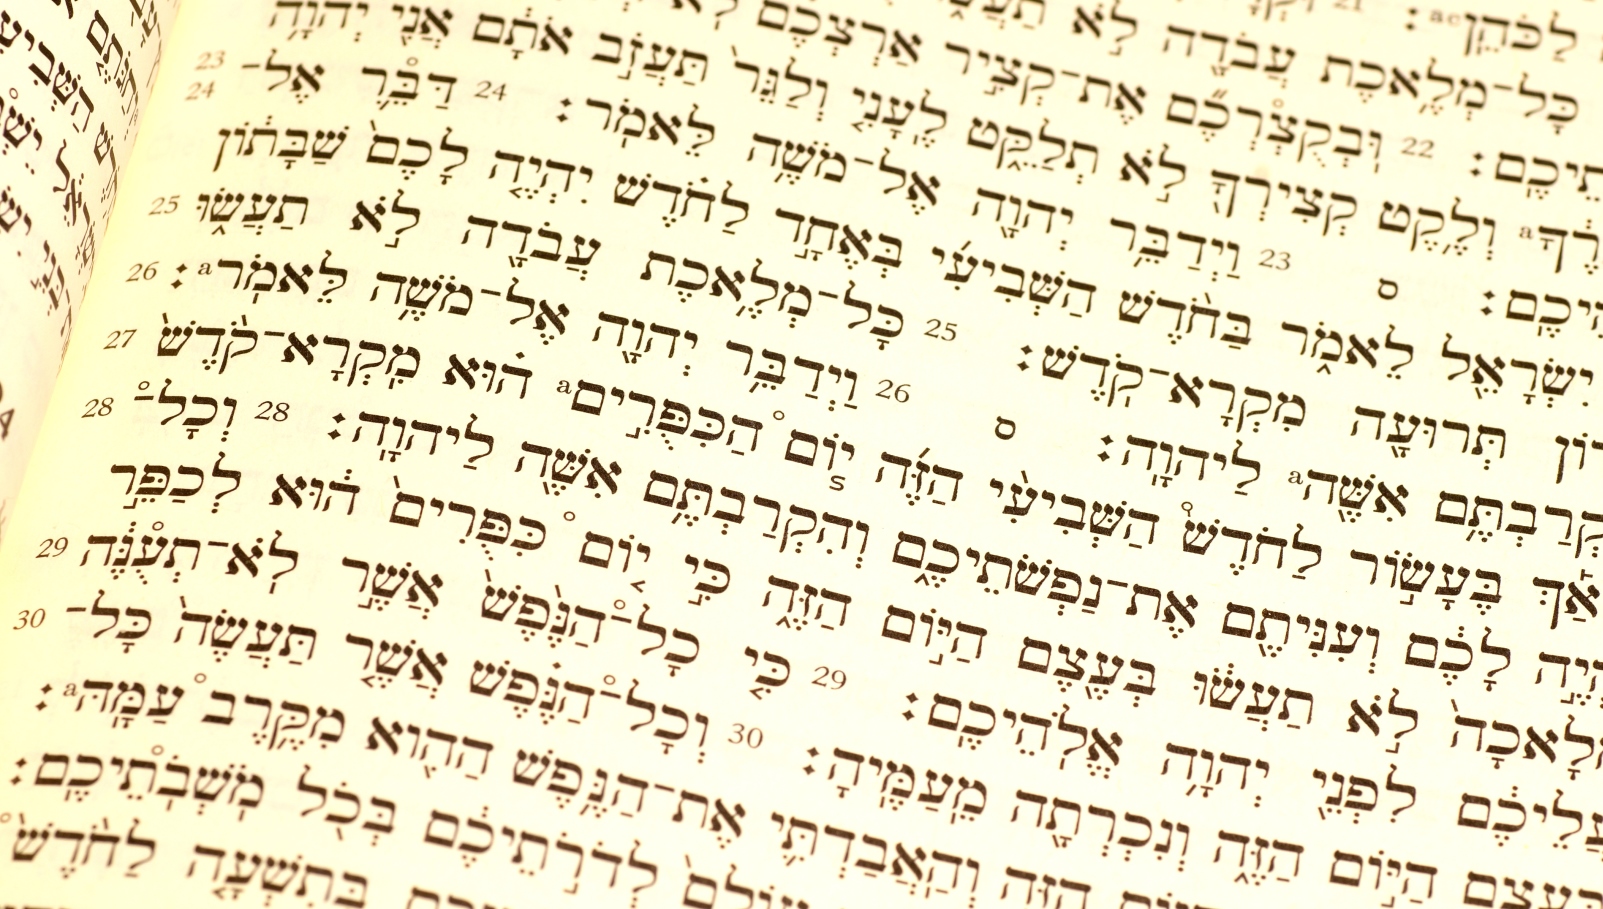 Bible direct translation from hebrew to english bible pic